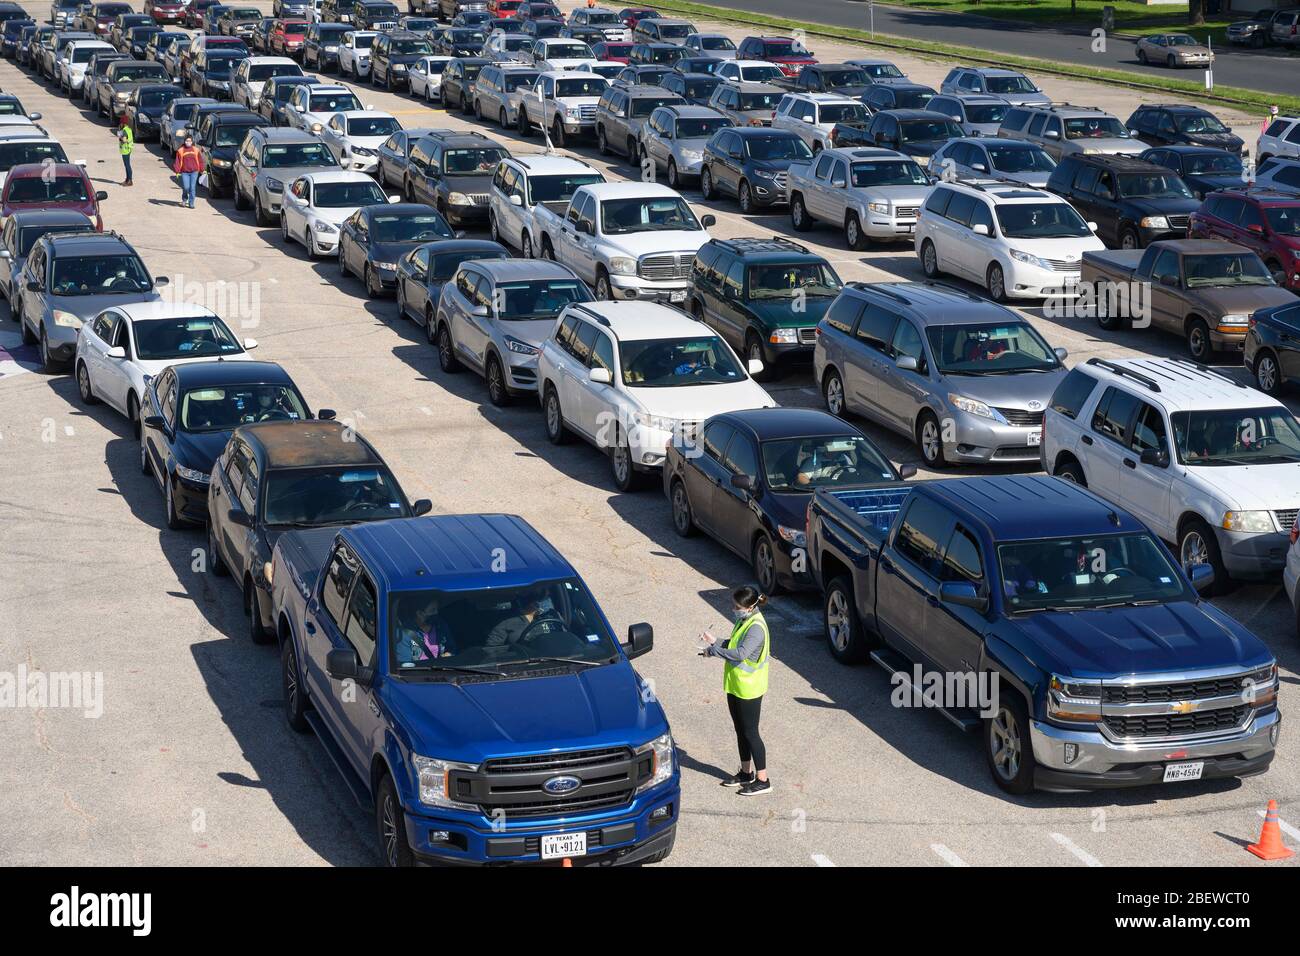 Drivers in hundreds of vehicles wait for Central Texas Food Bank volunteers to deliver 28-pound boxes of staples during a food giveaway in Austin, Texas. Almost 1,500 families picked up boxes in response to extensive coronavirus pandemic job losses and general Texas economic fallout. Stock Photo